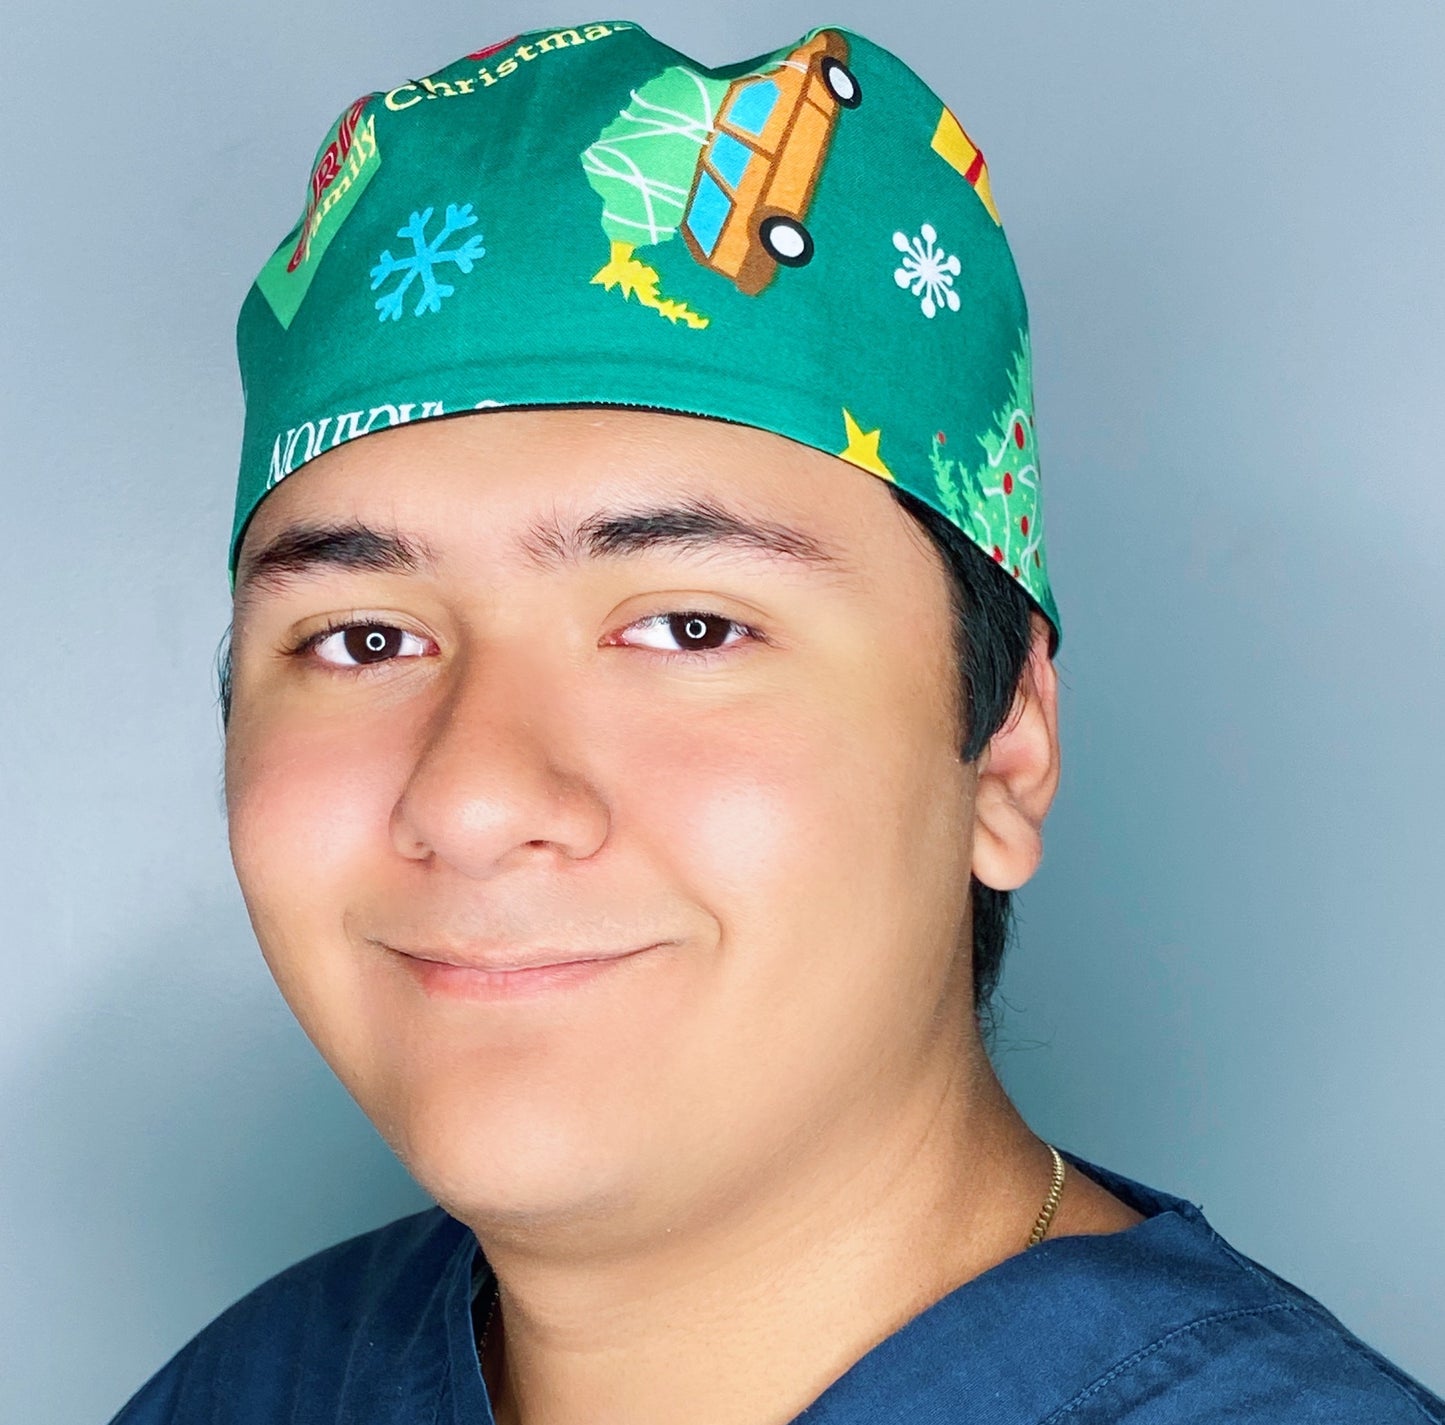 National Lampoon's Christmas Vacation Christmas/Winter themed Unisex Holiday Scrub Cap